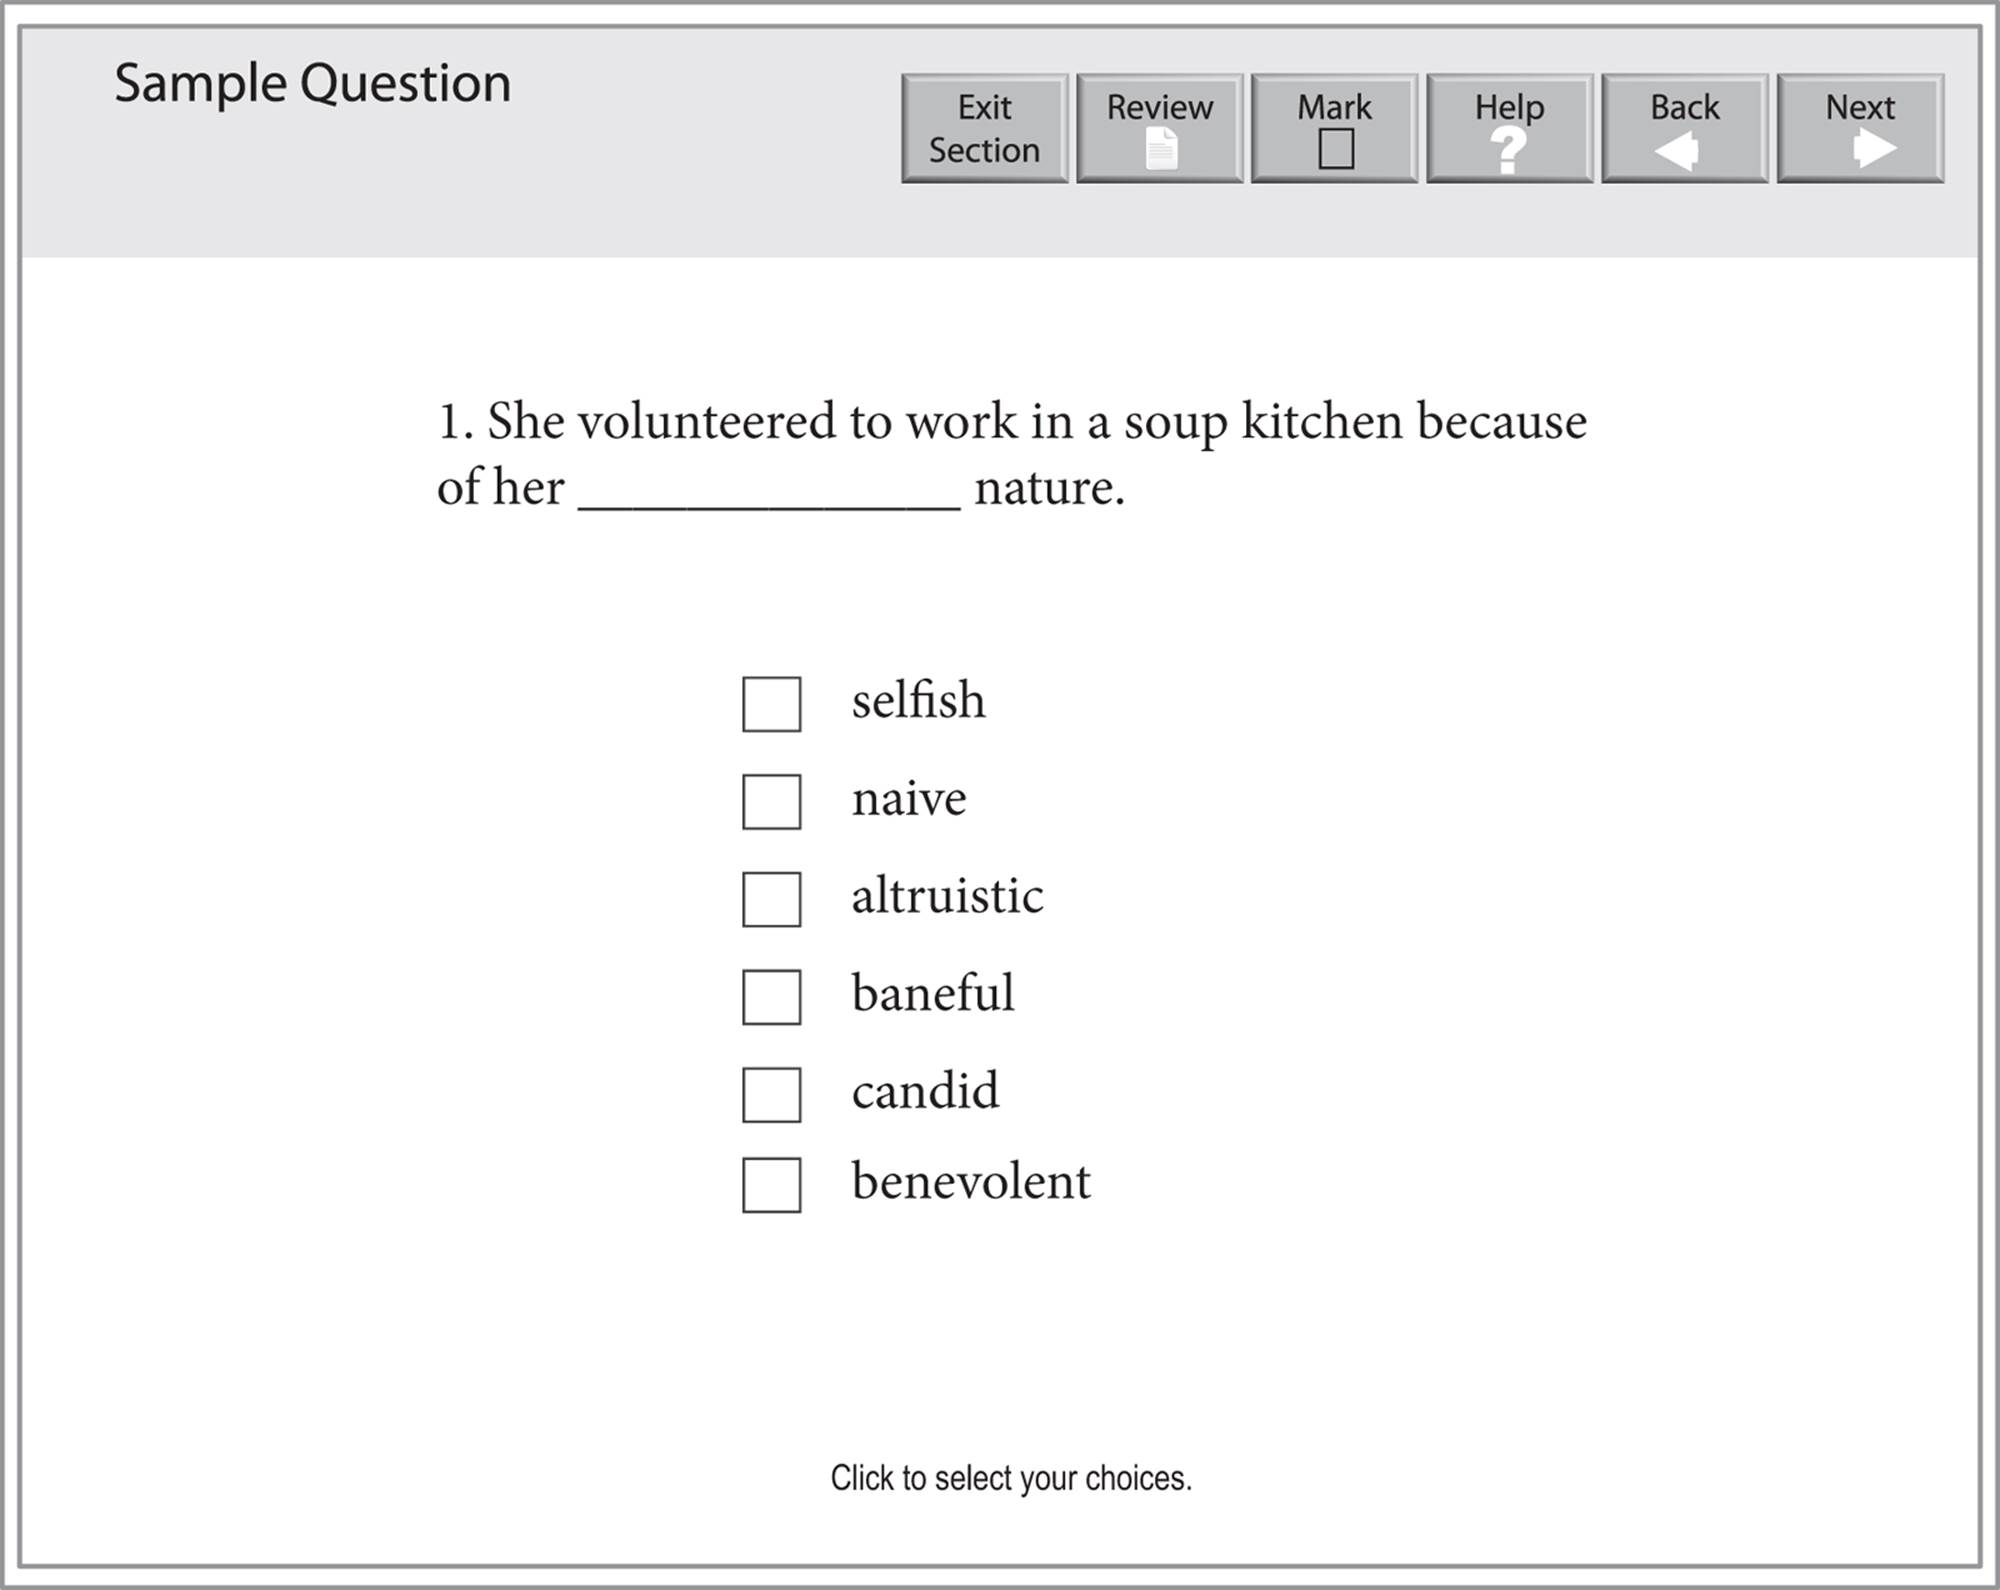 Sample sentence equivalence question: "She volunteered to work in a soup kitchen because of her blank nature." There are five choices for the answer: selfish, naive, altruistic, baneful, candid, and benevolent.